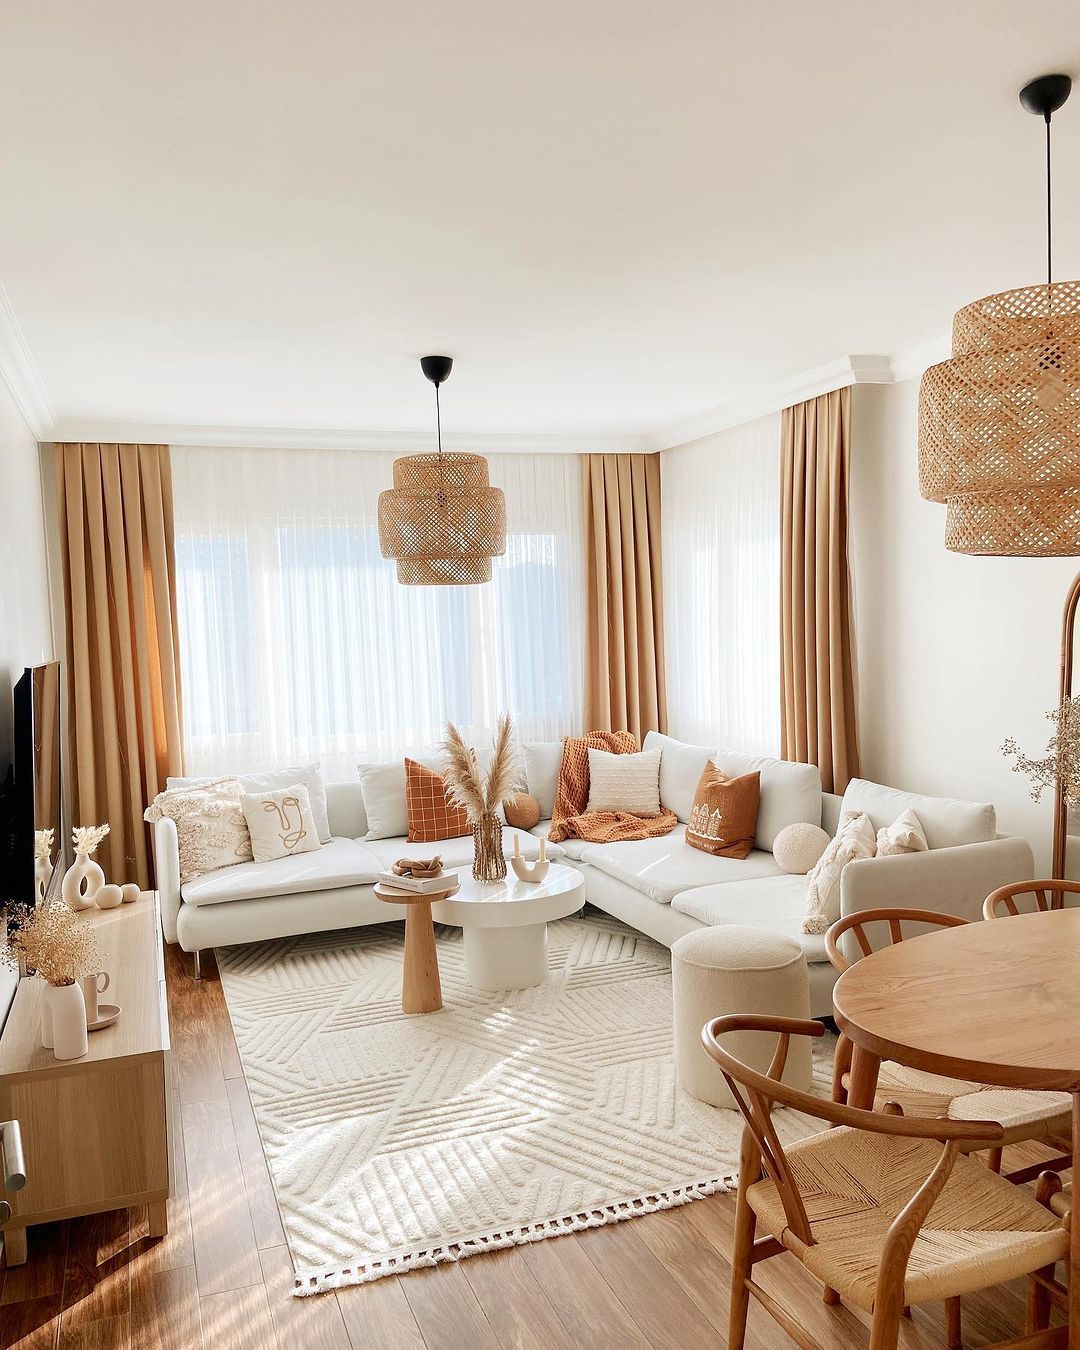 a good thick floor rug in the living room can elevate the decor while adding warmth to the interior as in this space